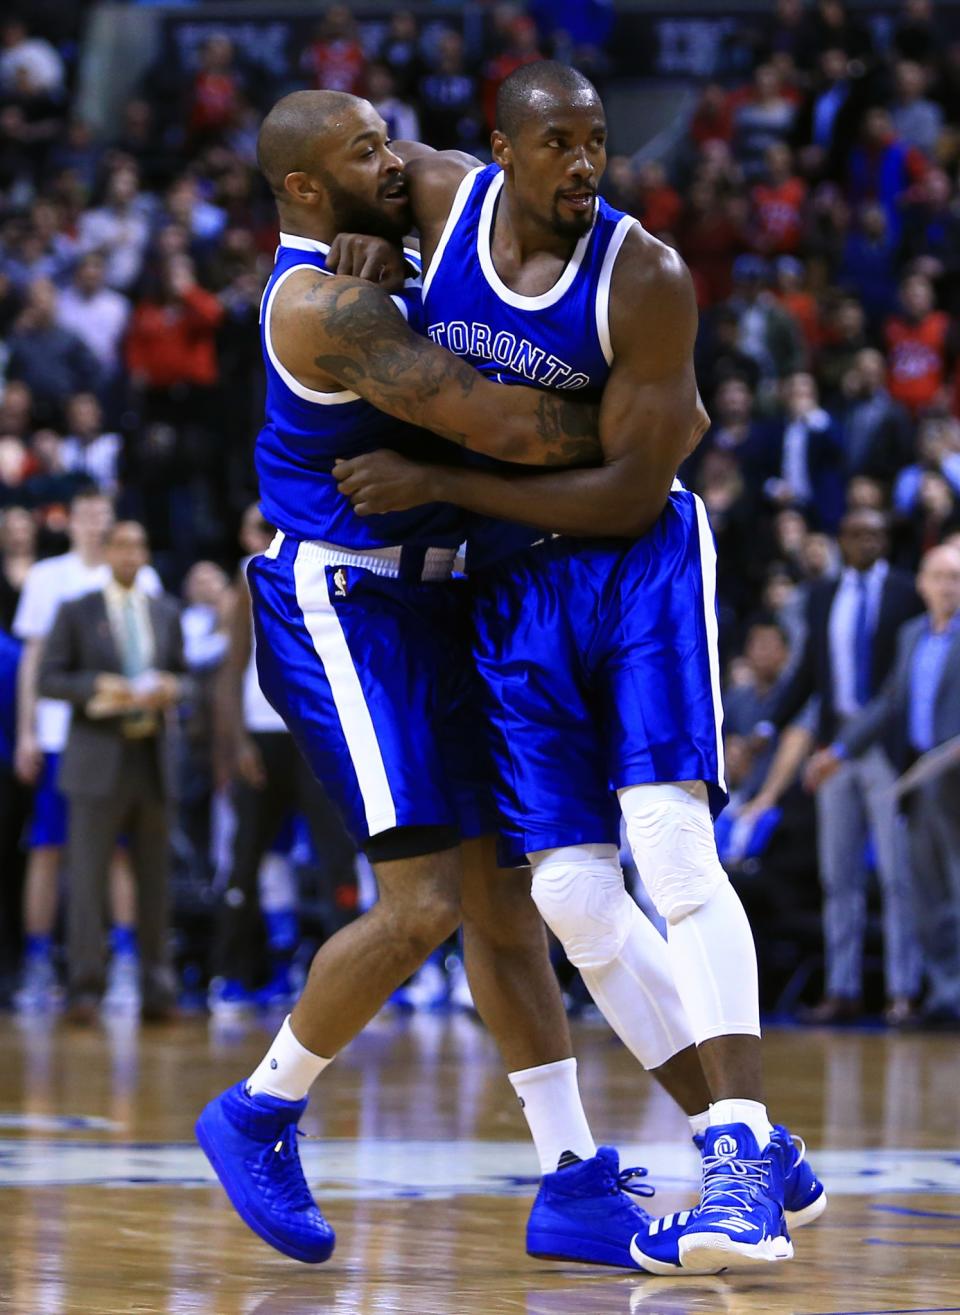 <p>P.J. Tucker #2 holds back teammate Serge Ibaka #9 of the Toronto Raptors after a fight with Robin Lopez #8 of the Chicago Bulls during the second half of an NBA game at Air Canada Centre on March 21, 2017 in Toronto, Canada. NOTE TO USER: User expressly acknowledges and agrees that, by downloading and or using this photograph, User is consenting to the terms and conditions of the Getty Images License Agreement. (Photo by Vaughn Ridley/Getty Images) </p>